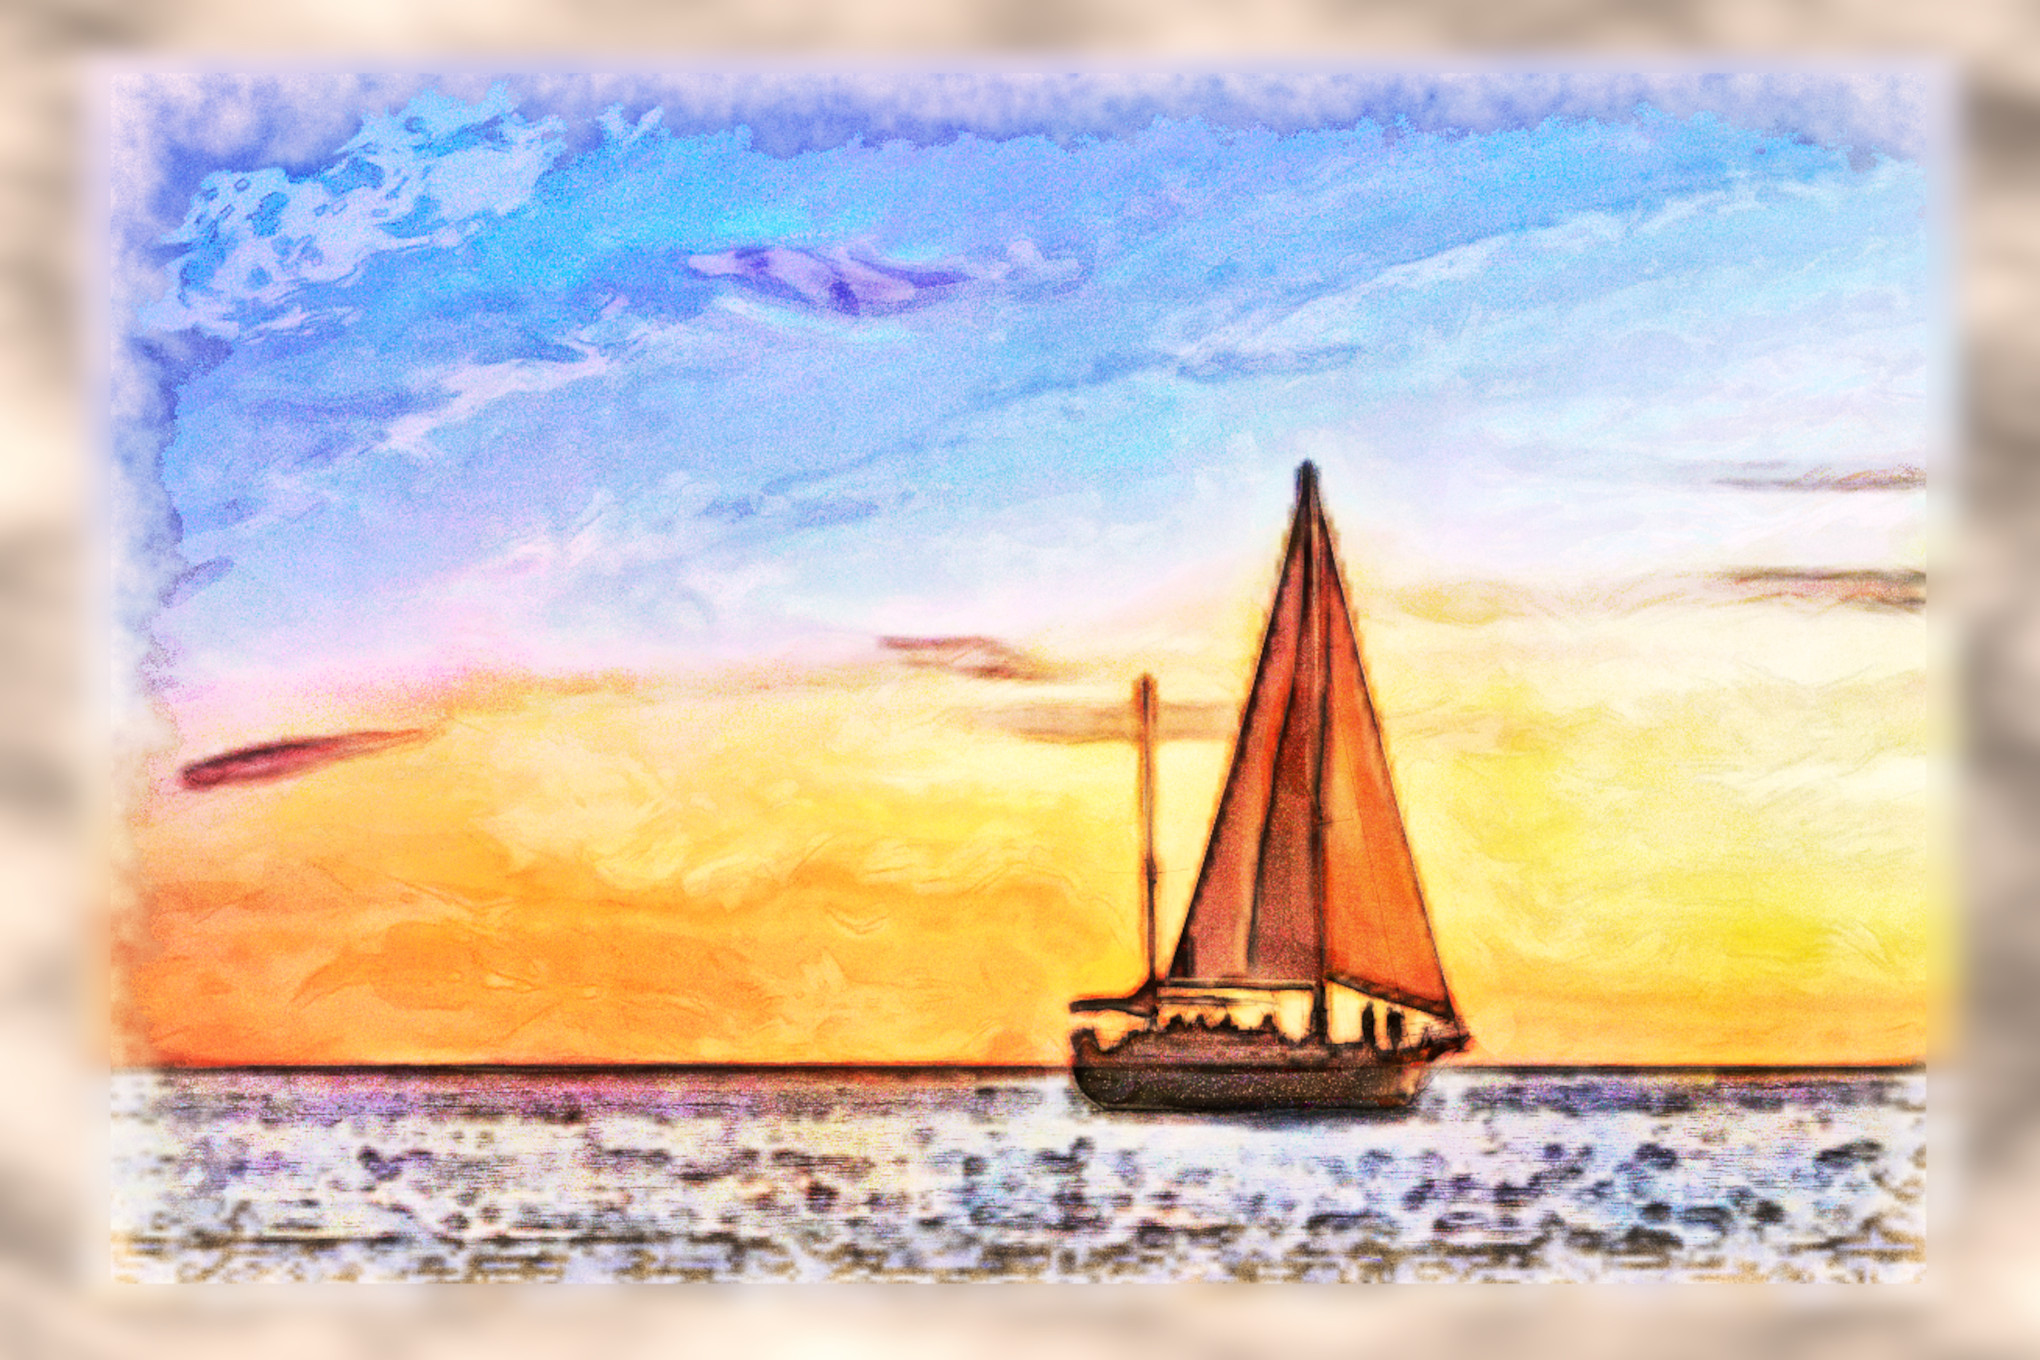 2023-09-30 14-40-50 seascape-5236865 with a Watercolor Pastels Effect 2023 (4.0,75.0,35.0,40.0,50.0,9.0,70.0,True,0).jpg